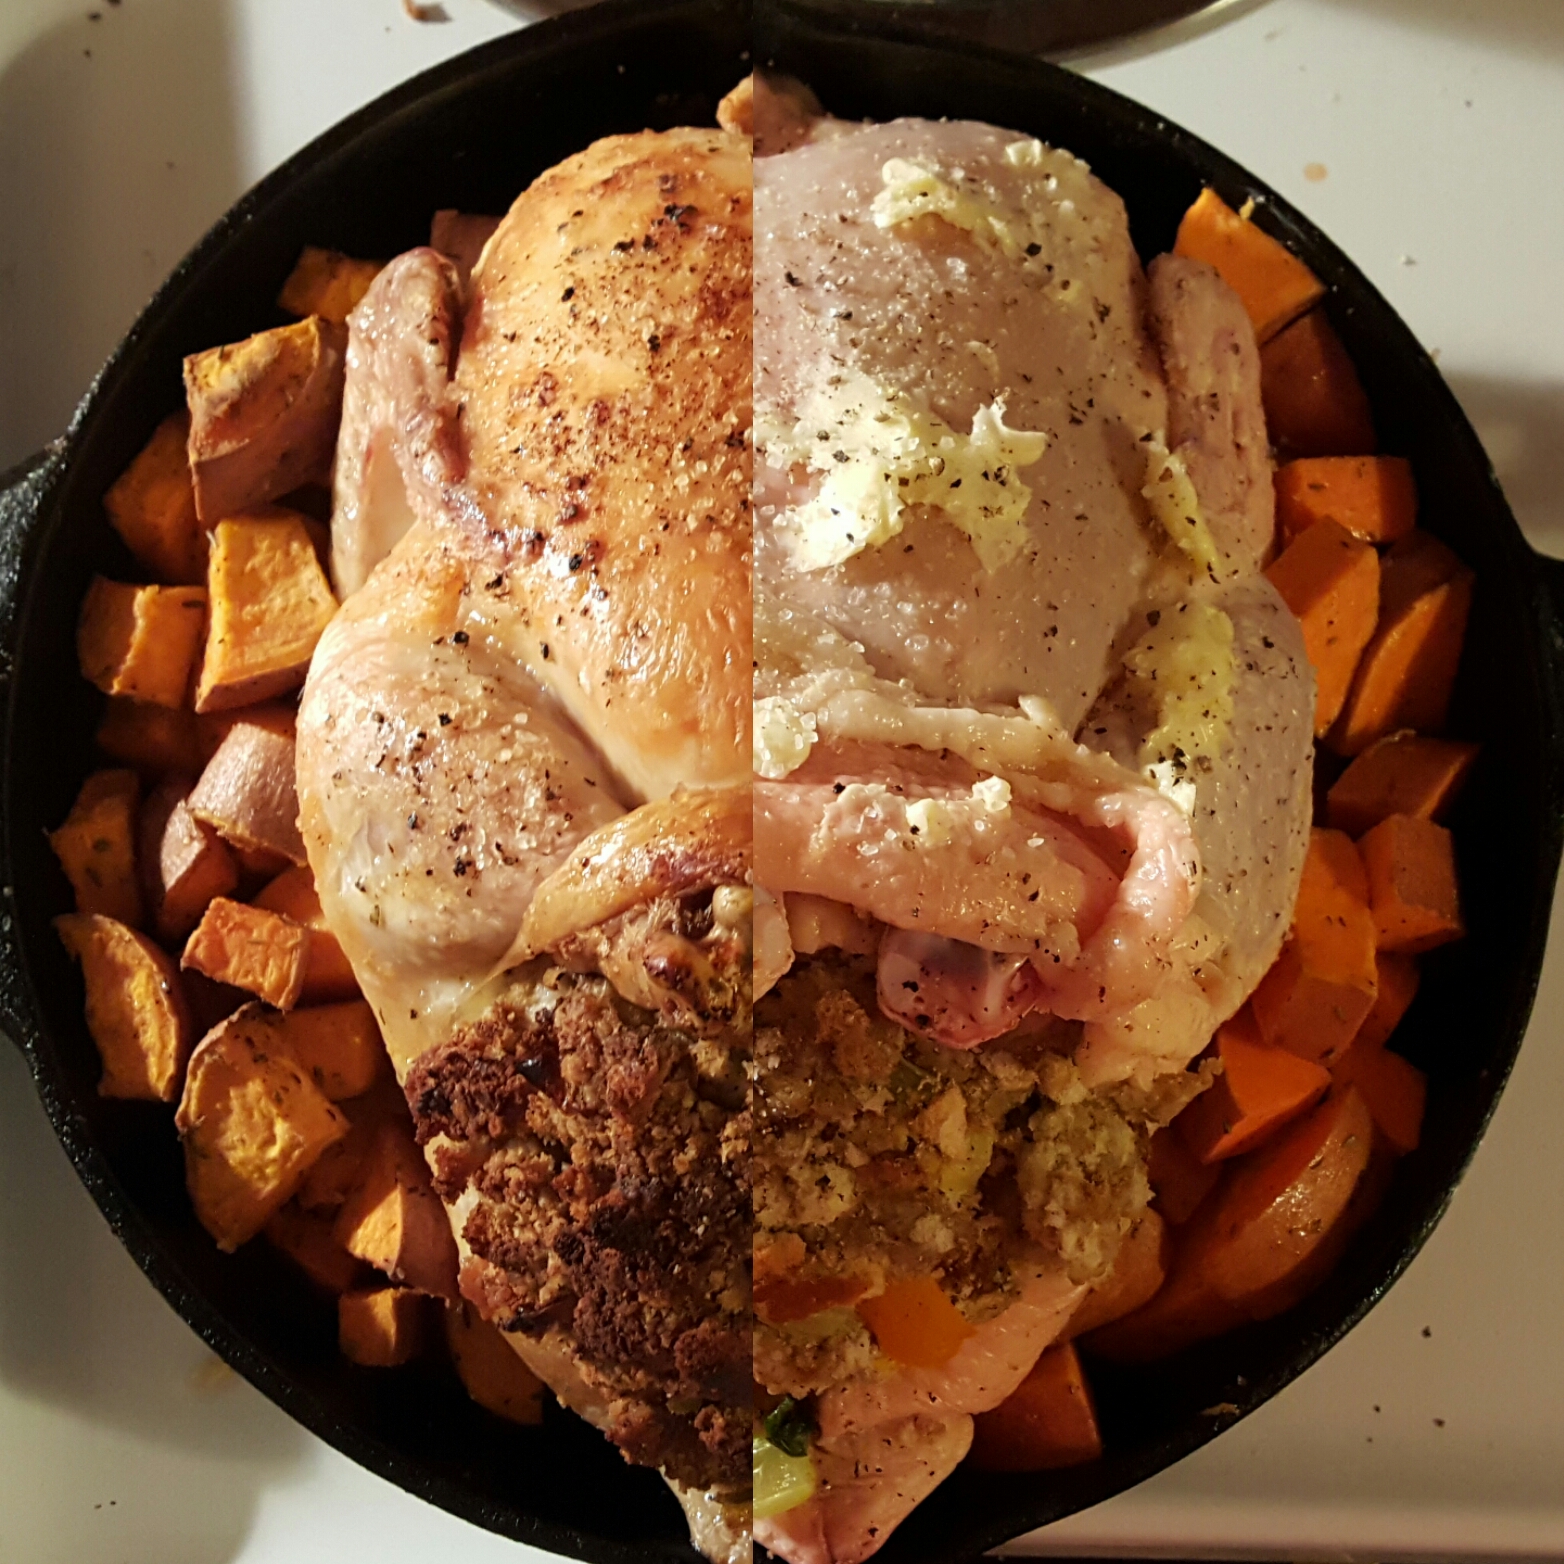 Roasted chicken and sweet potatoes with stuffing